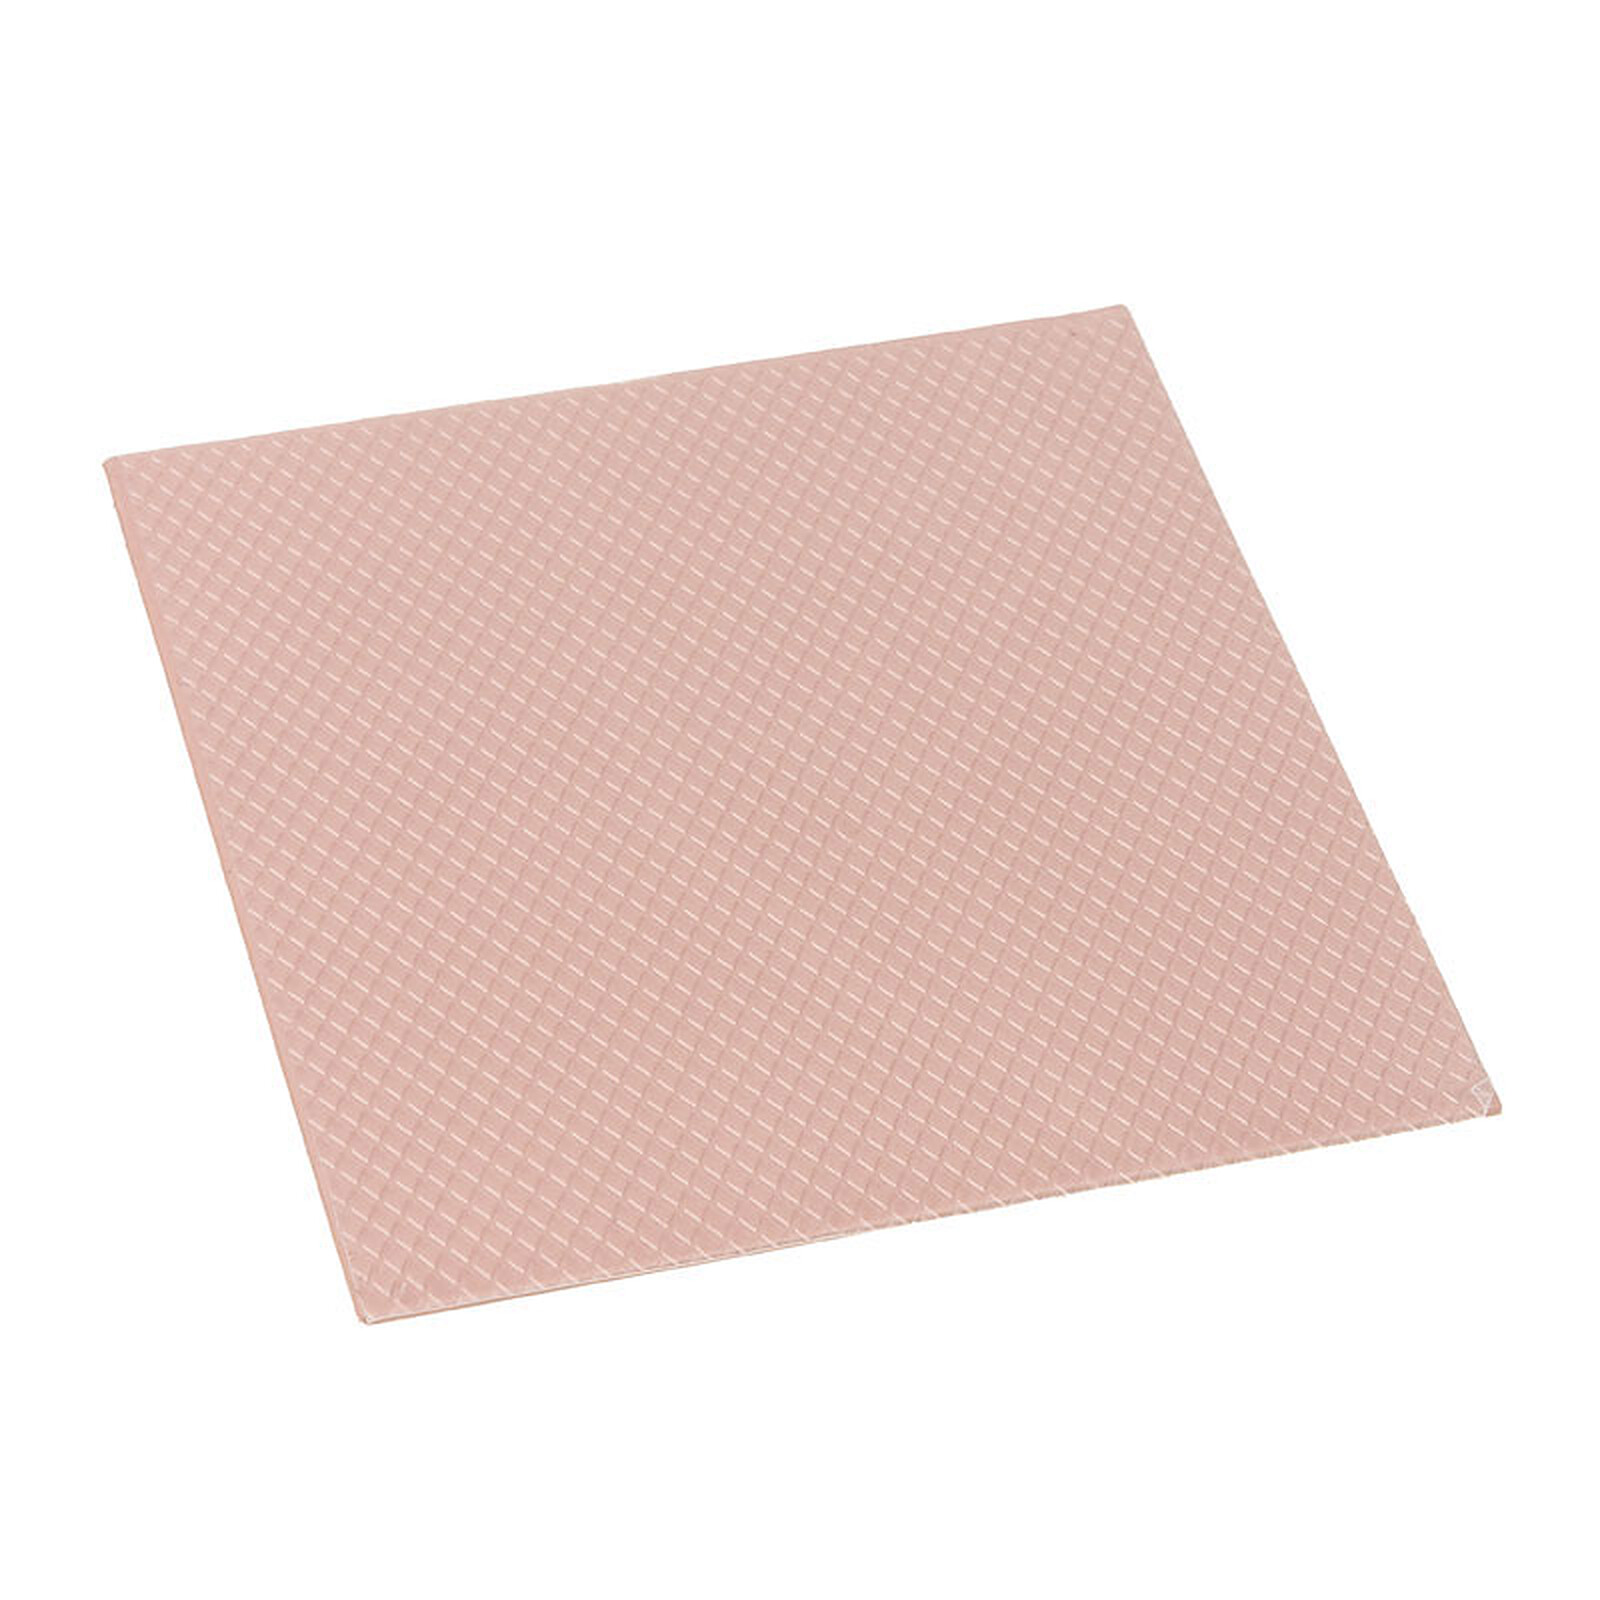 Thermal Grizzly Minus Pad 8 (120 x 20 x 1.5 mm) - Pâte thermique